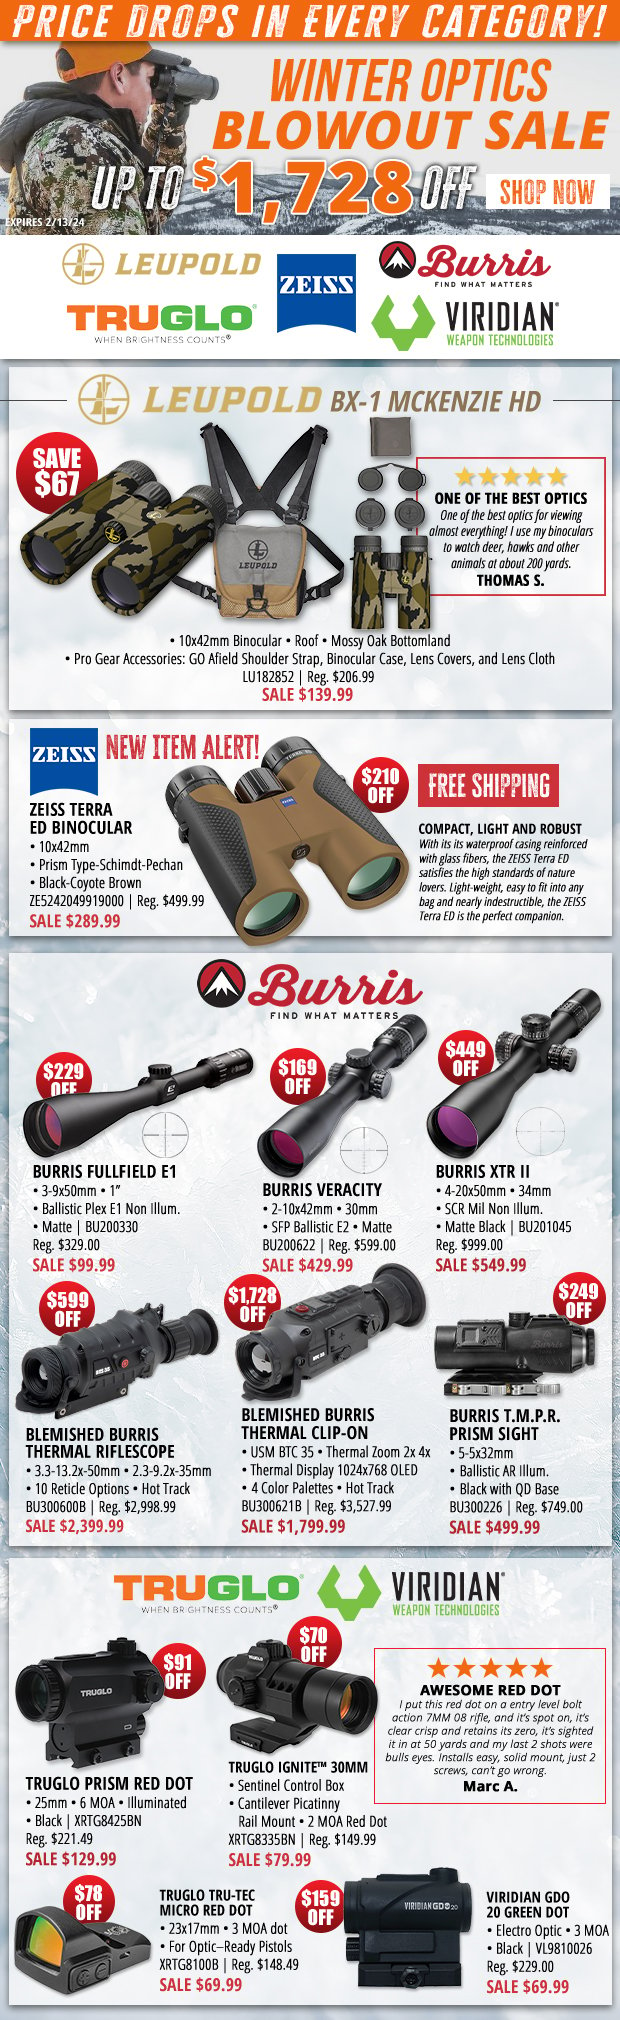 Up to $1,728 Off with Our Winter Optics Blowout Sale!